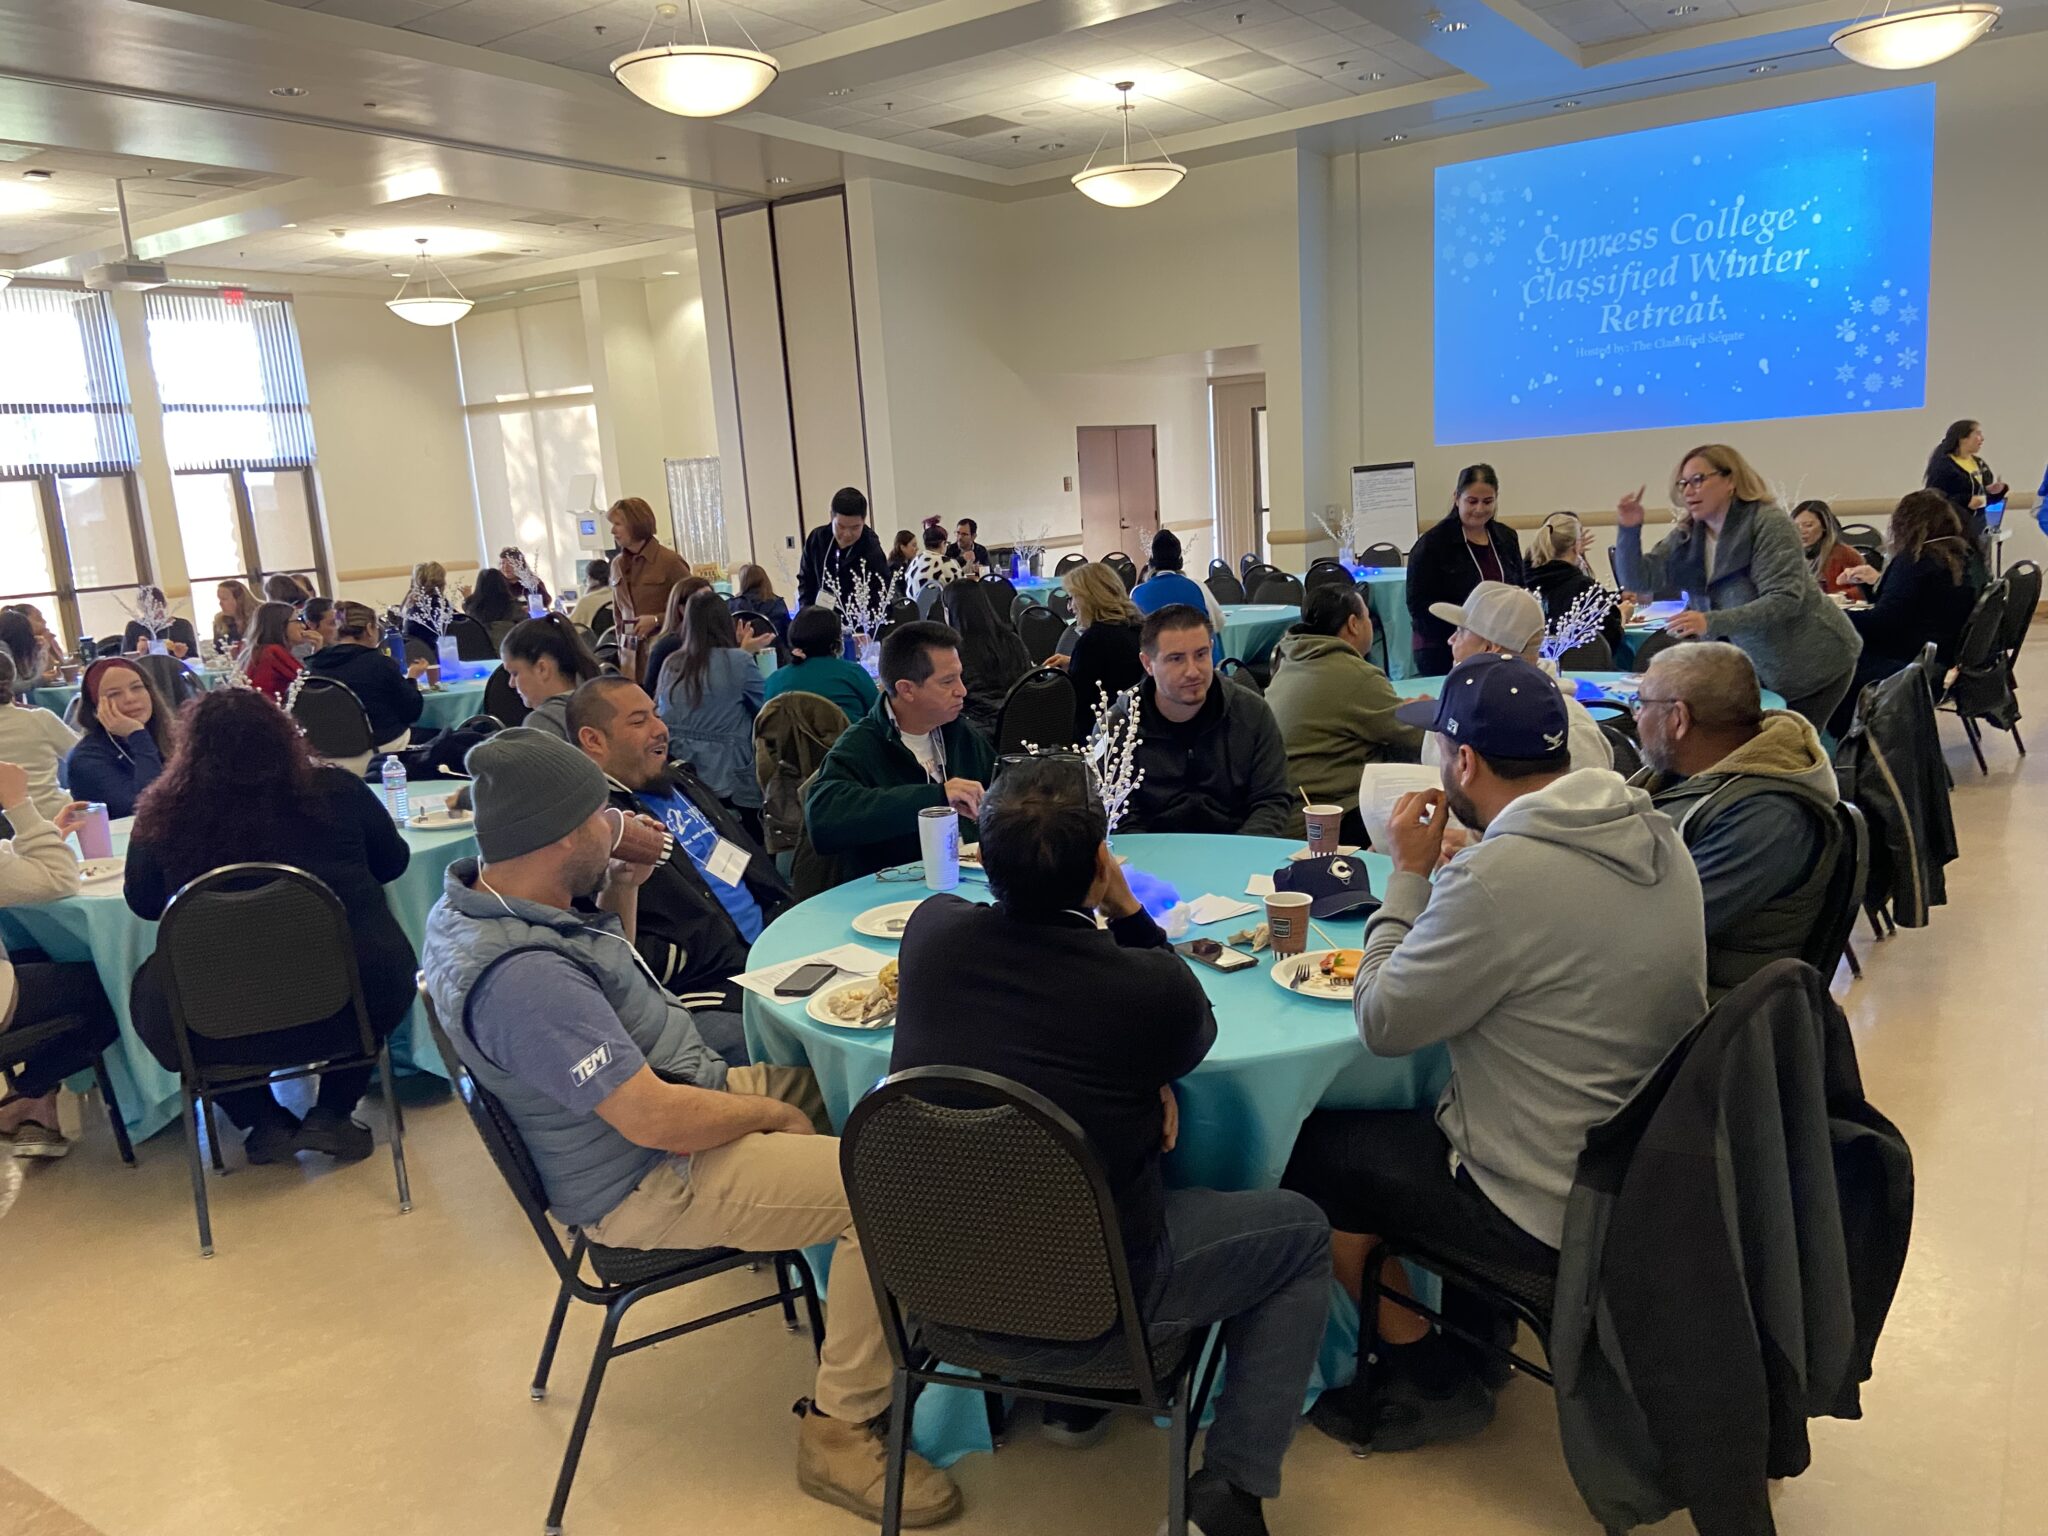 Classified staff eating breakfast and connecting with other colleagues.